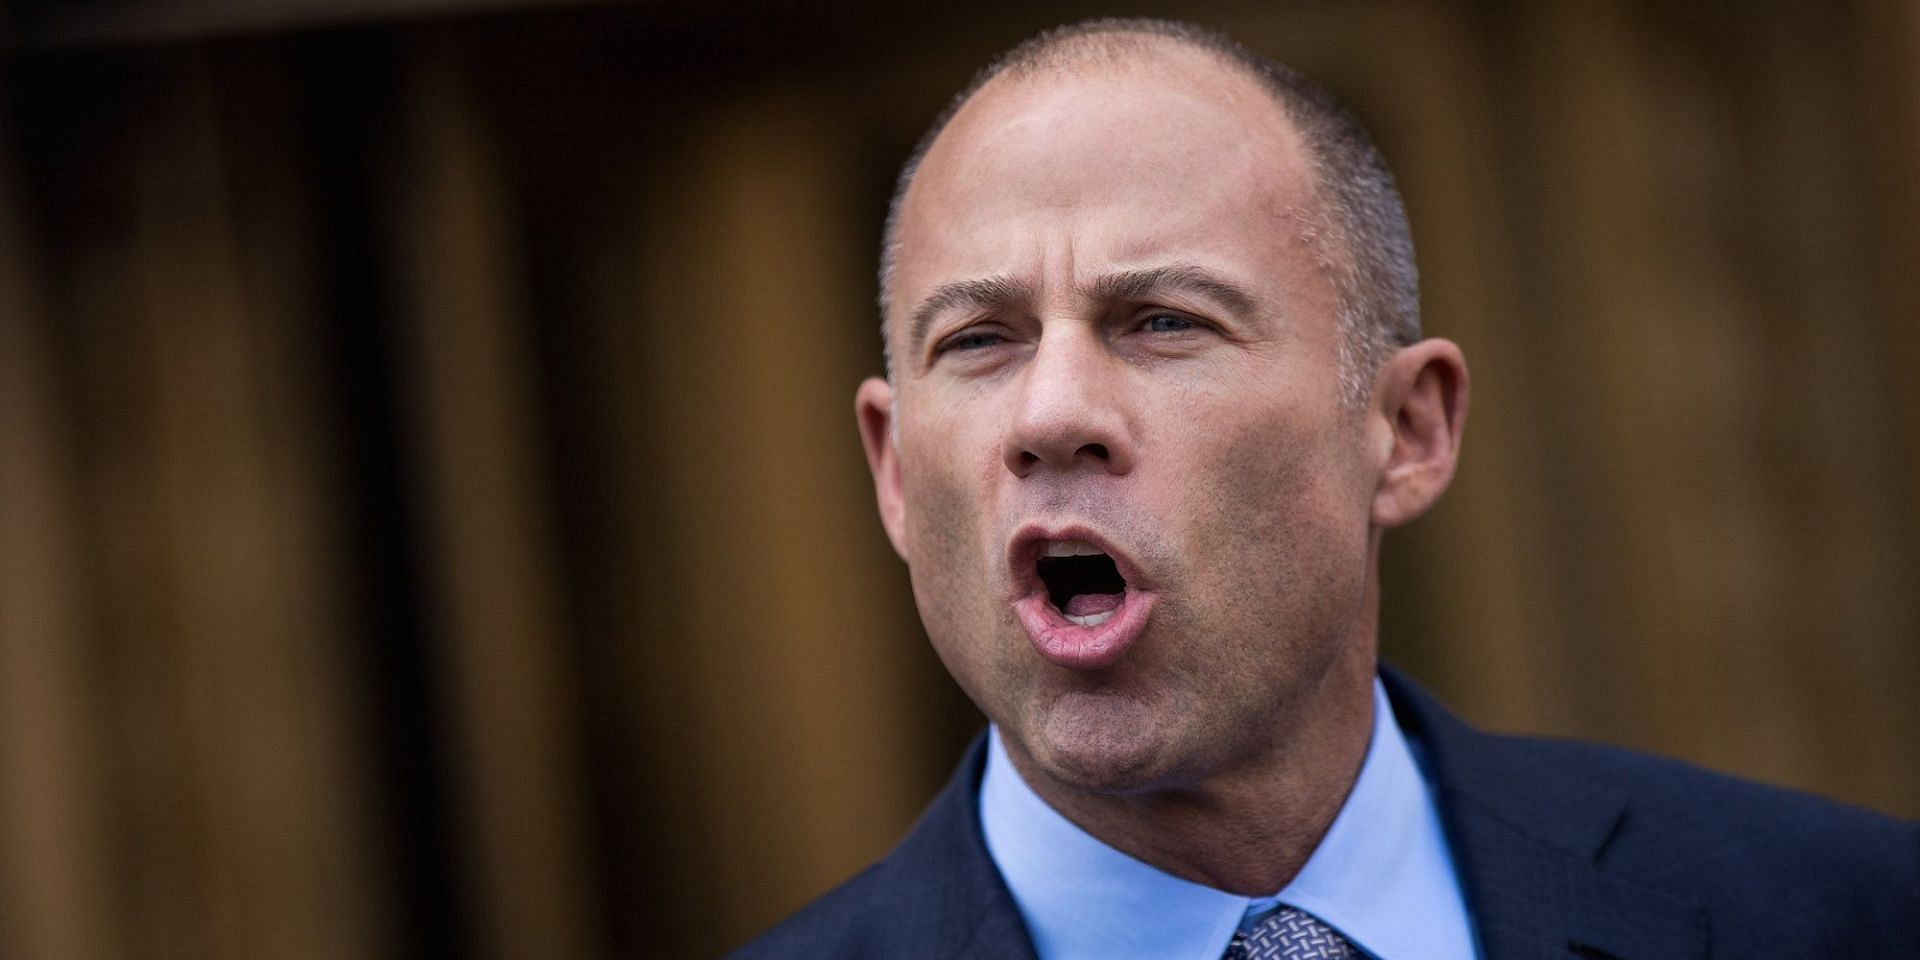 Disgraced California attorney Michael Avenatti pleaded guilty to fraud and tax charges on Thursday (Image via Getty)